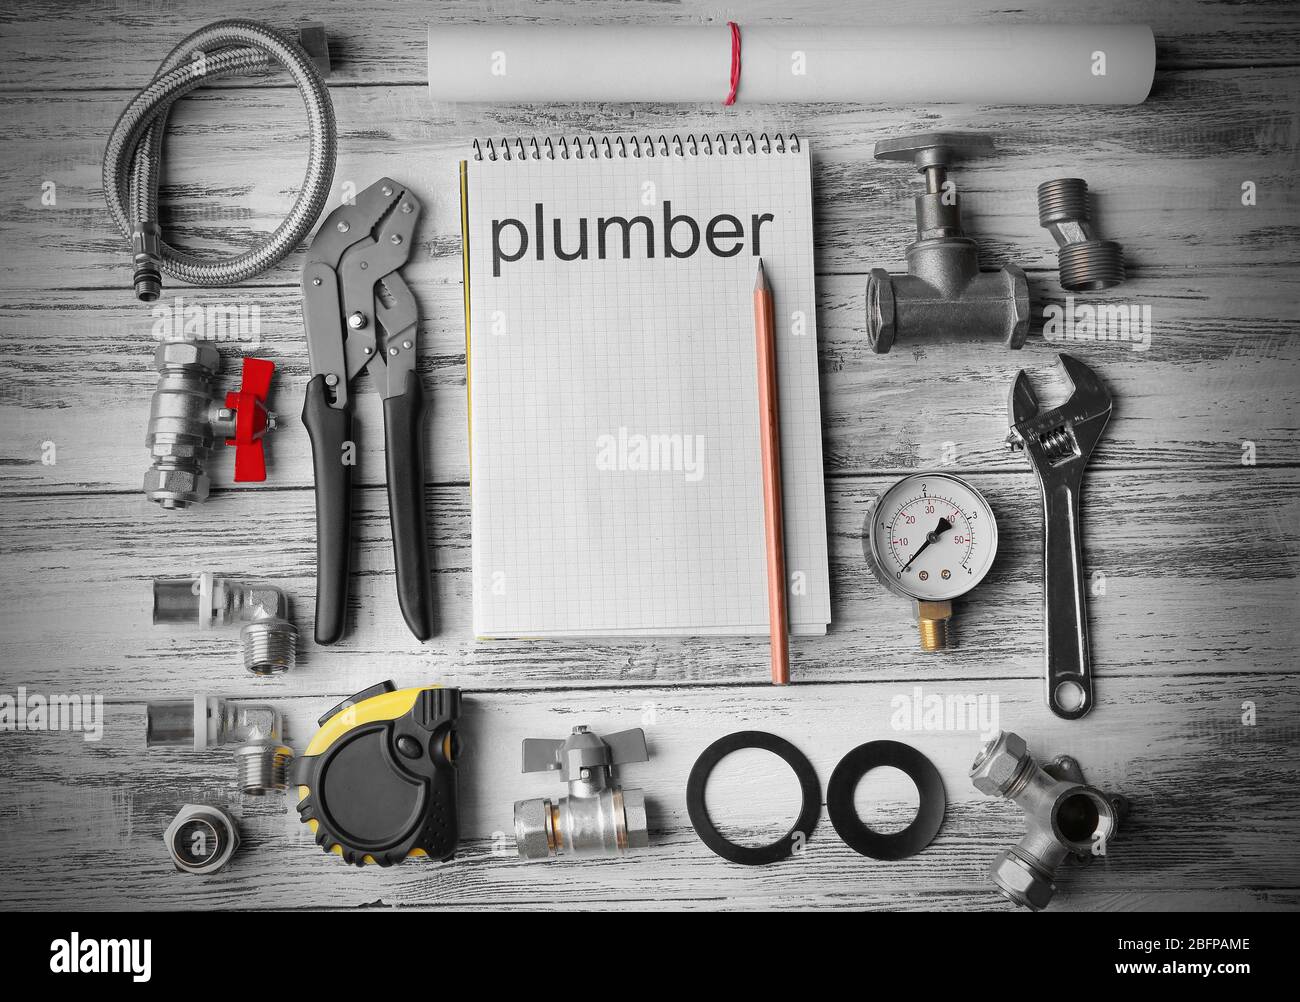 Plumbing concept. Plumber tools with notebook on wooden textured background Stock Photo